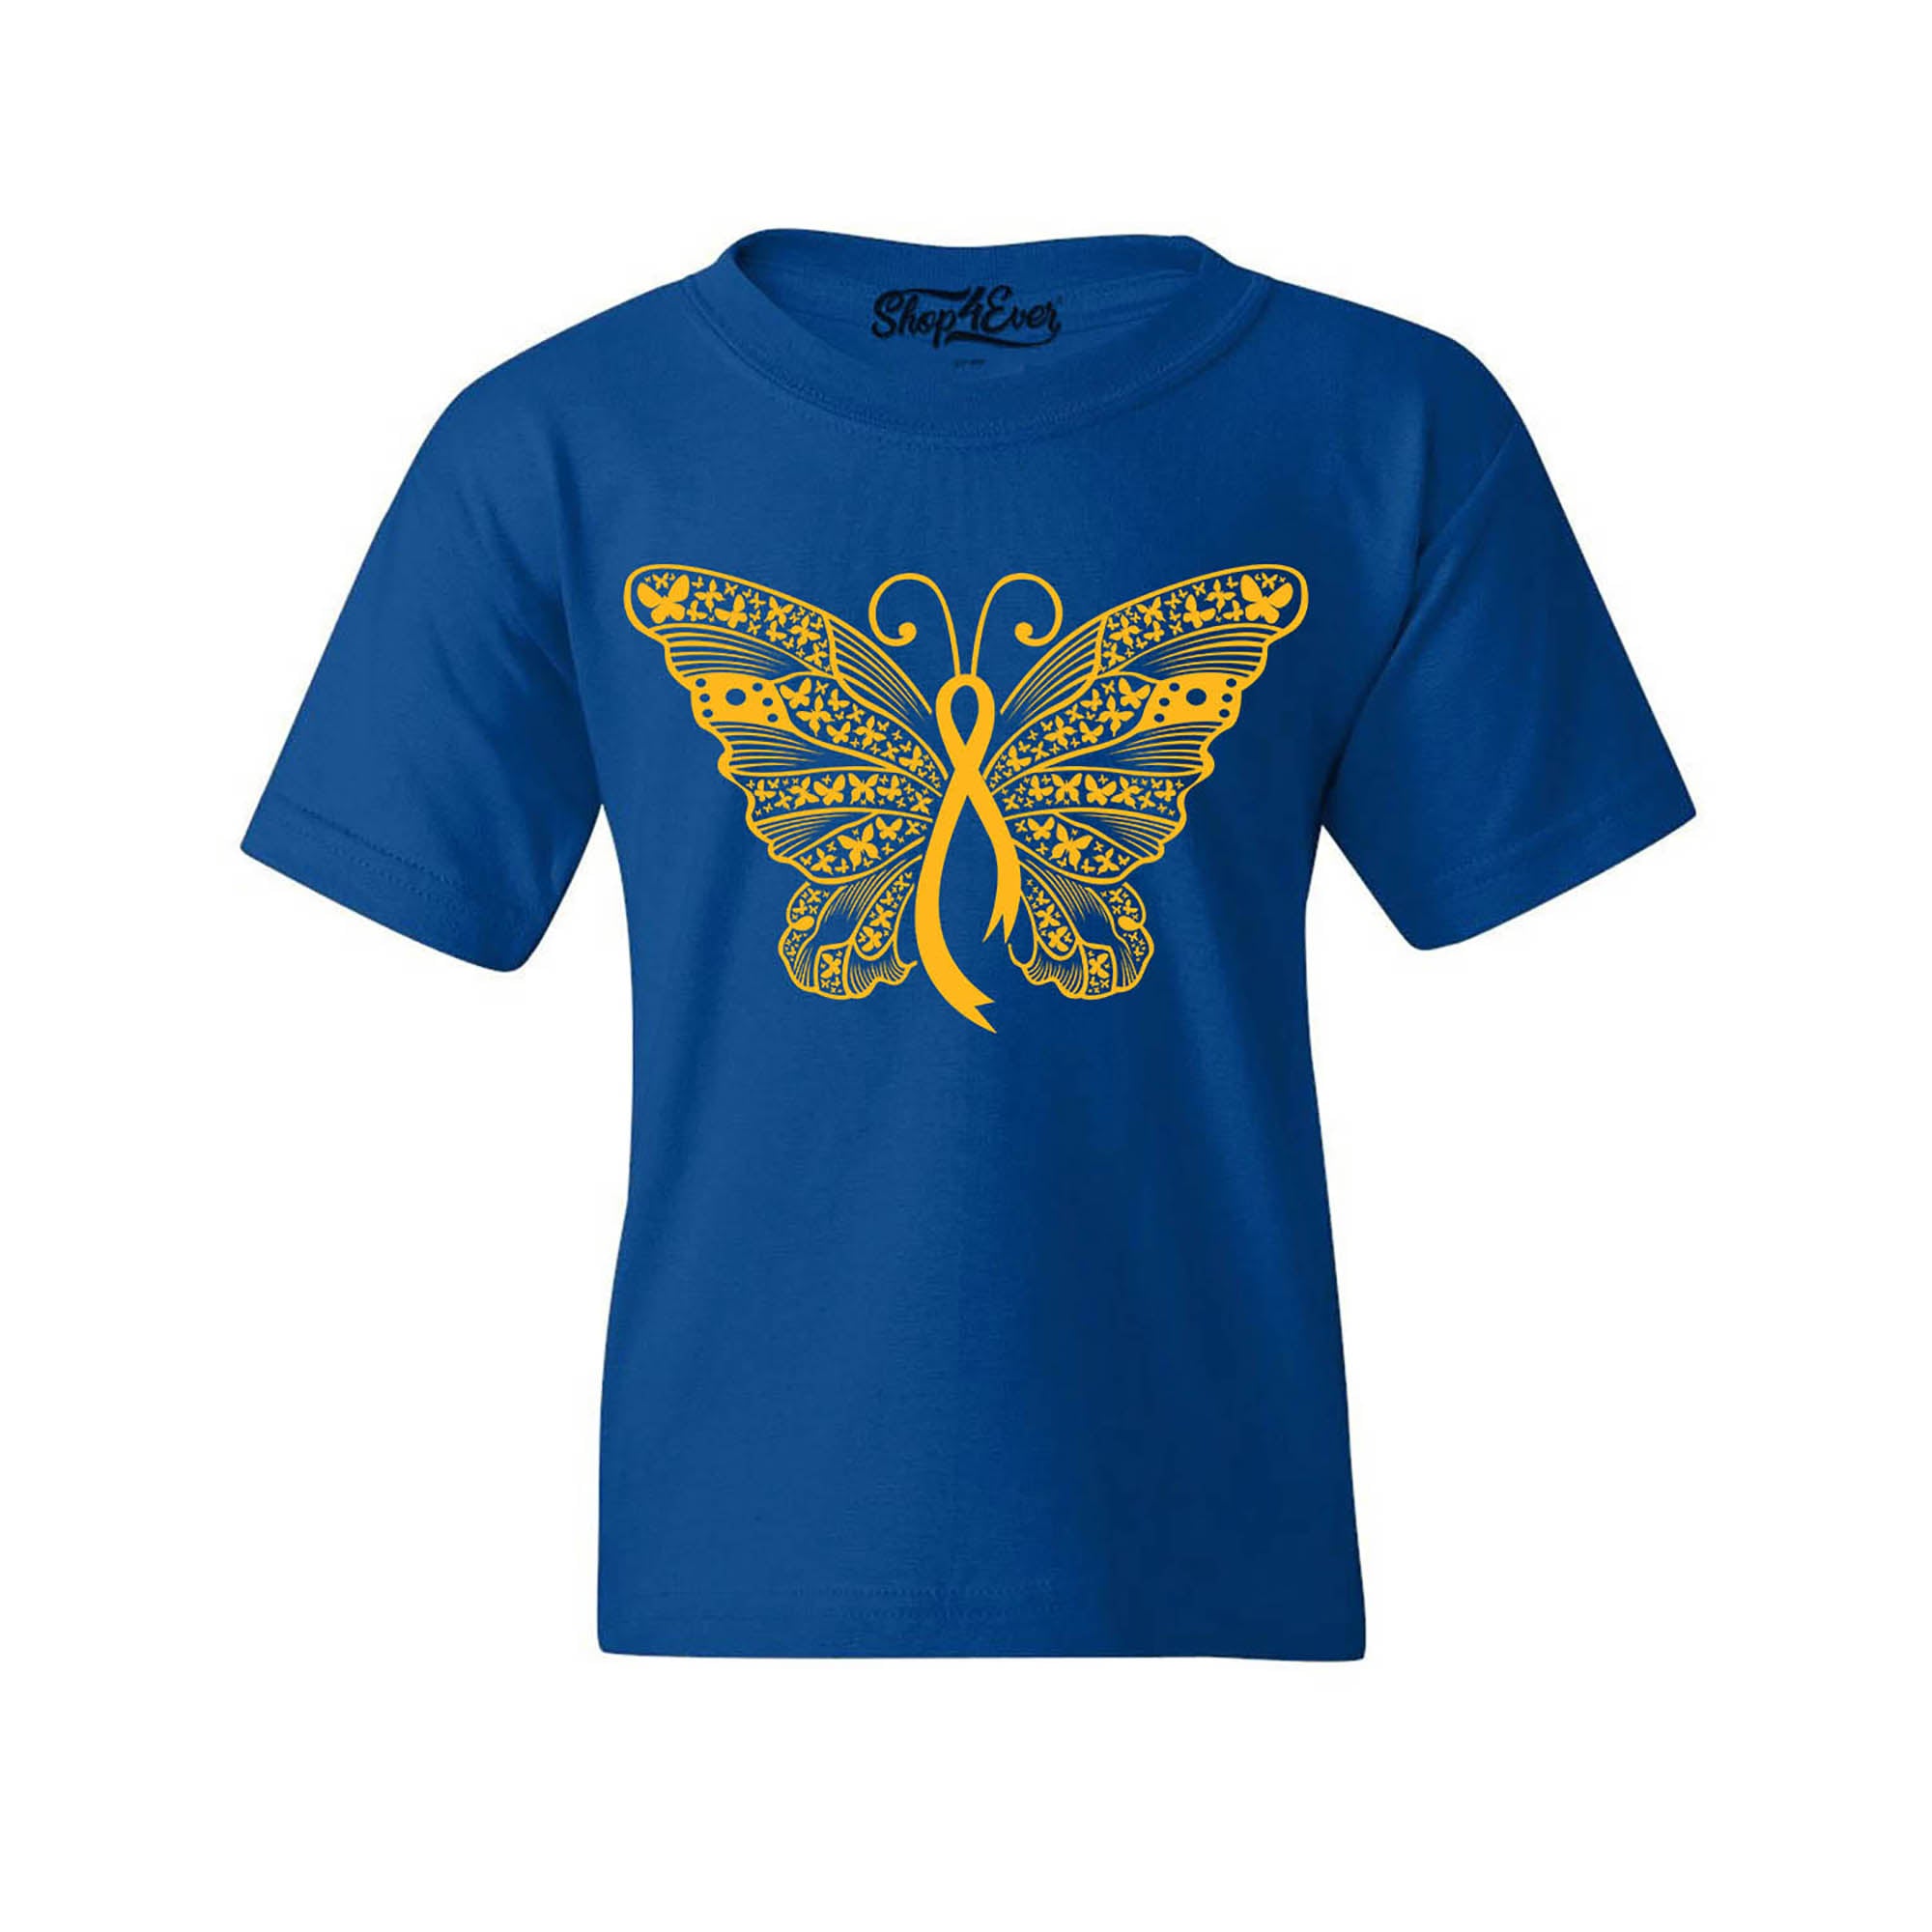 Gold Ribbon Butterfly Childhood Cancer Awareness Kids Child Tee Youth's T-Shirt